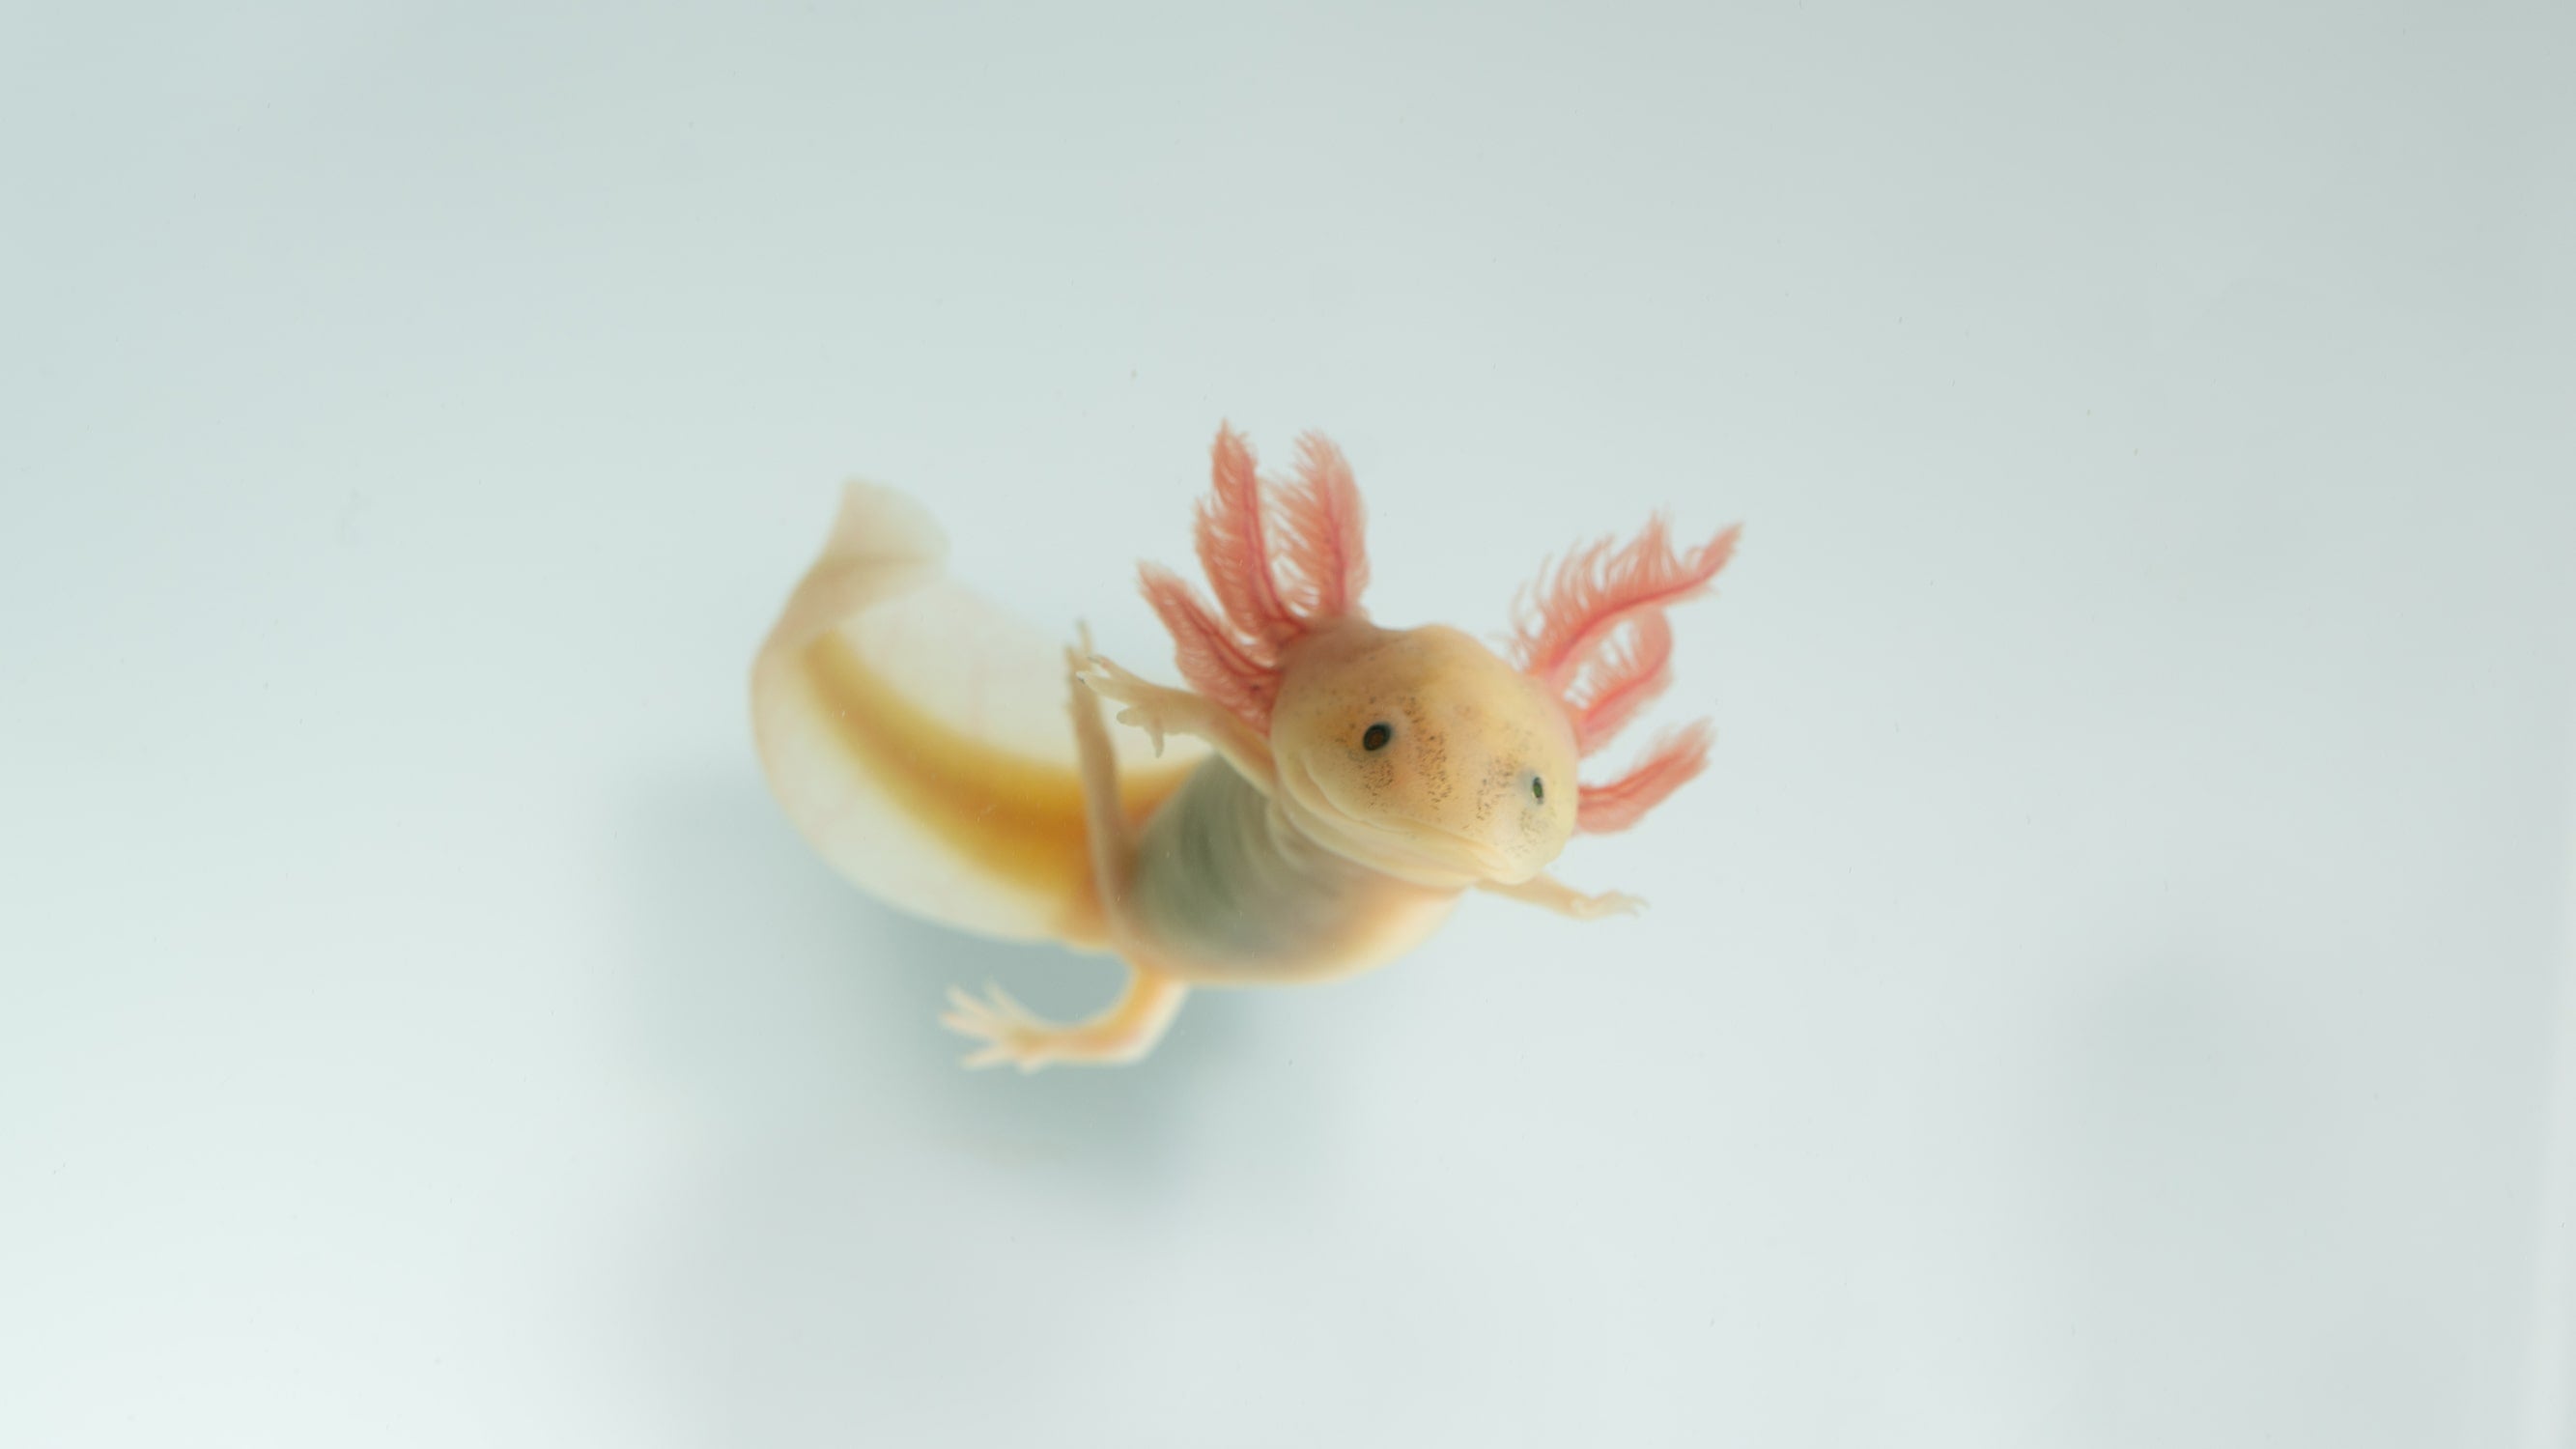 Salwyrr Client on X: New Axolotl collection available right now